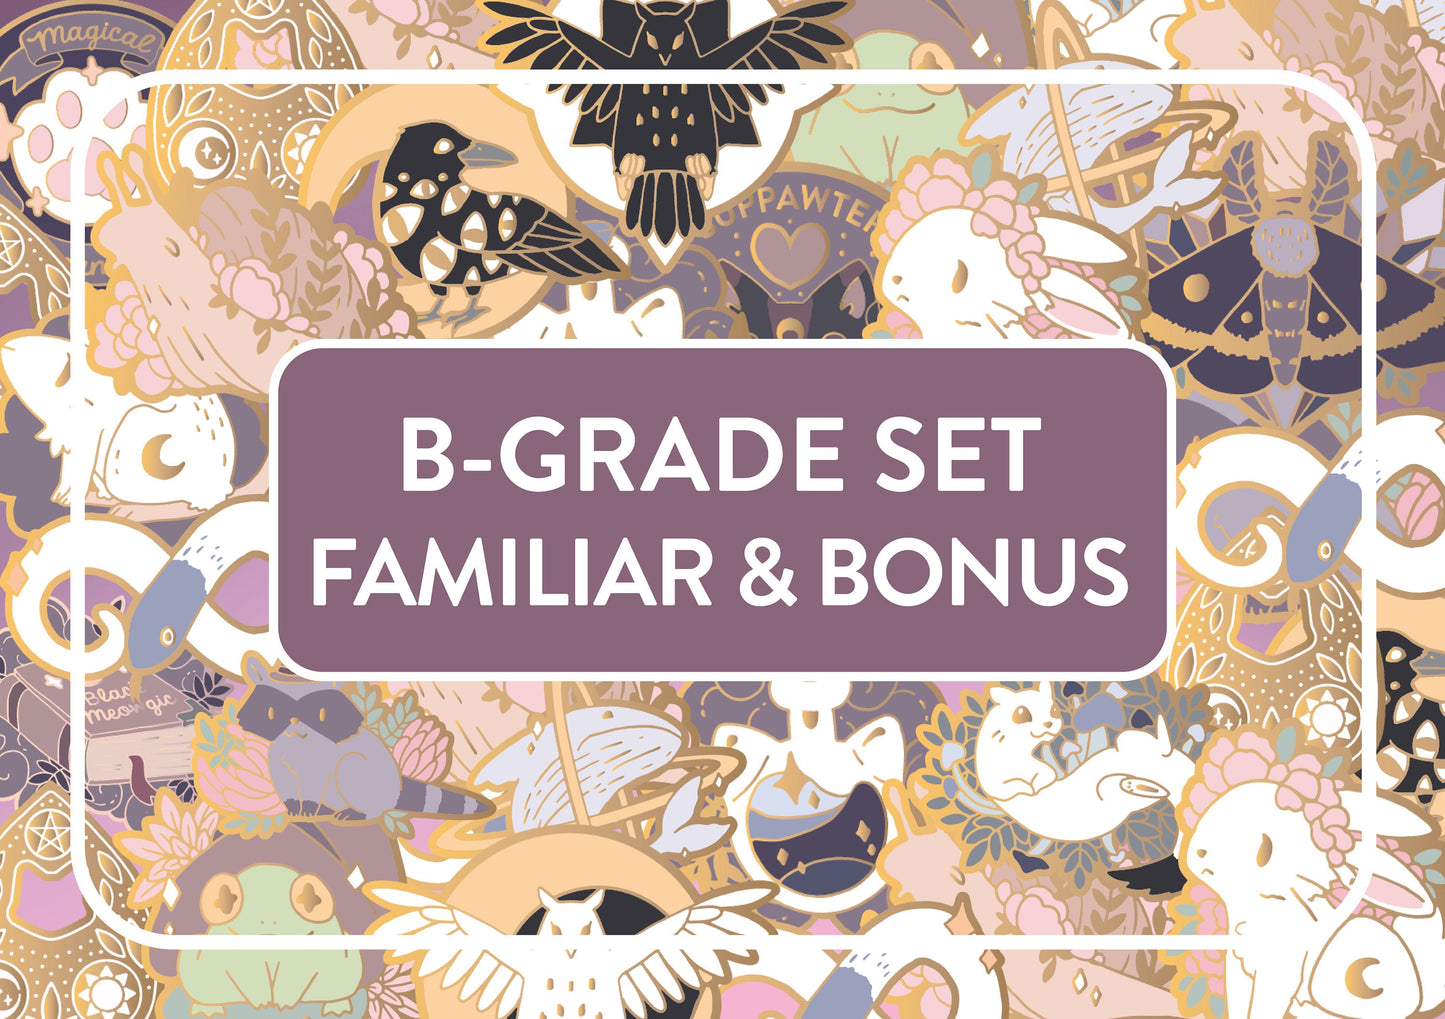 PIN SECONDS B-Grade Grab Bag, Lucky Bag with Hard Enamel Pins, Fanart, Own Art, Pop Culture <3 Surprise Bag with cute Pins